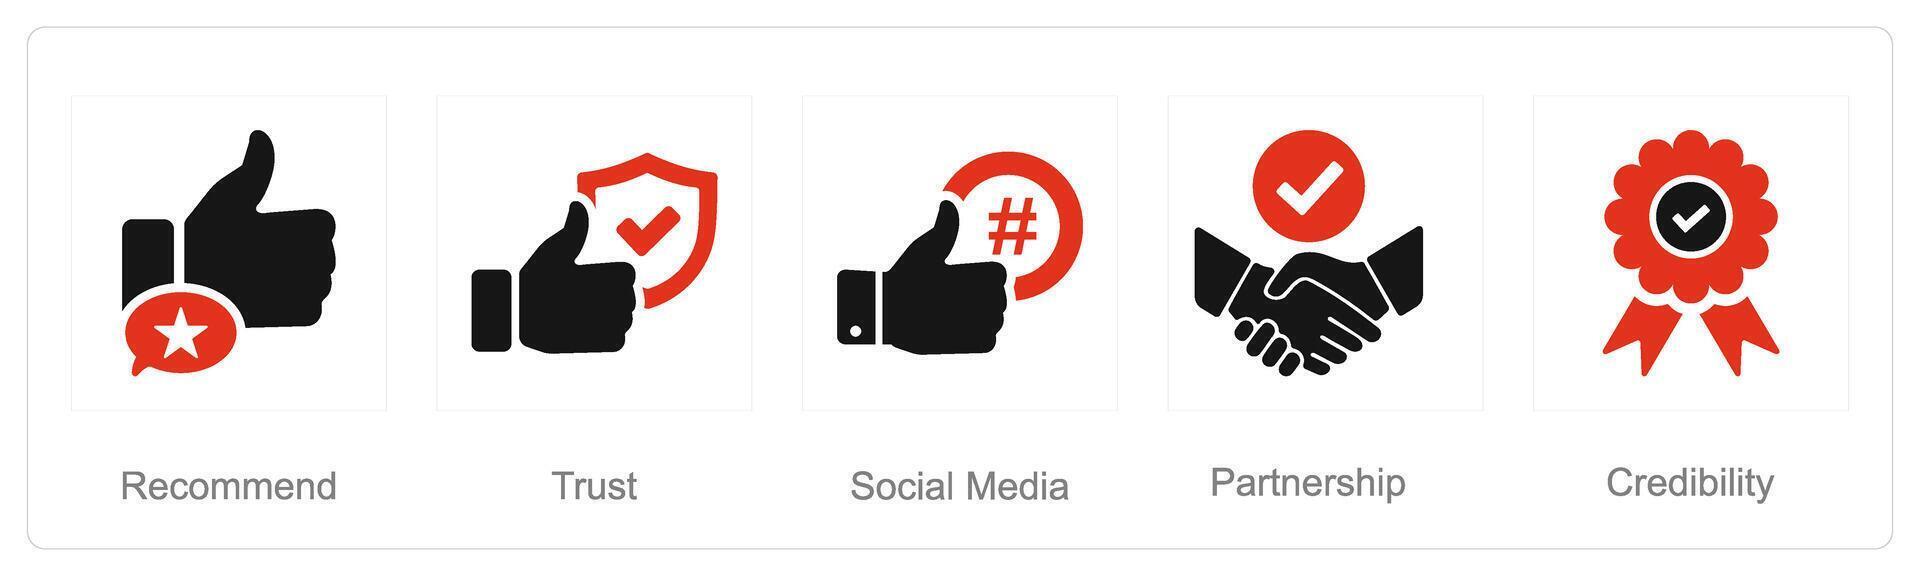 A set of 5 Influencer icons as recommend, trust, social media vector